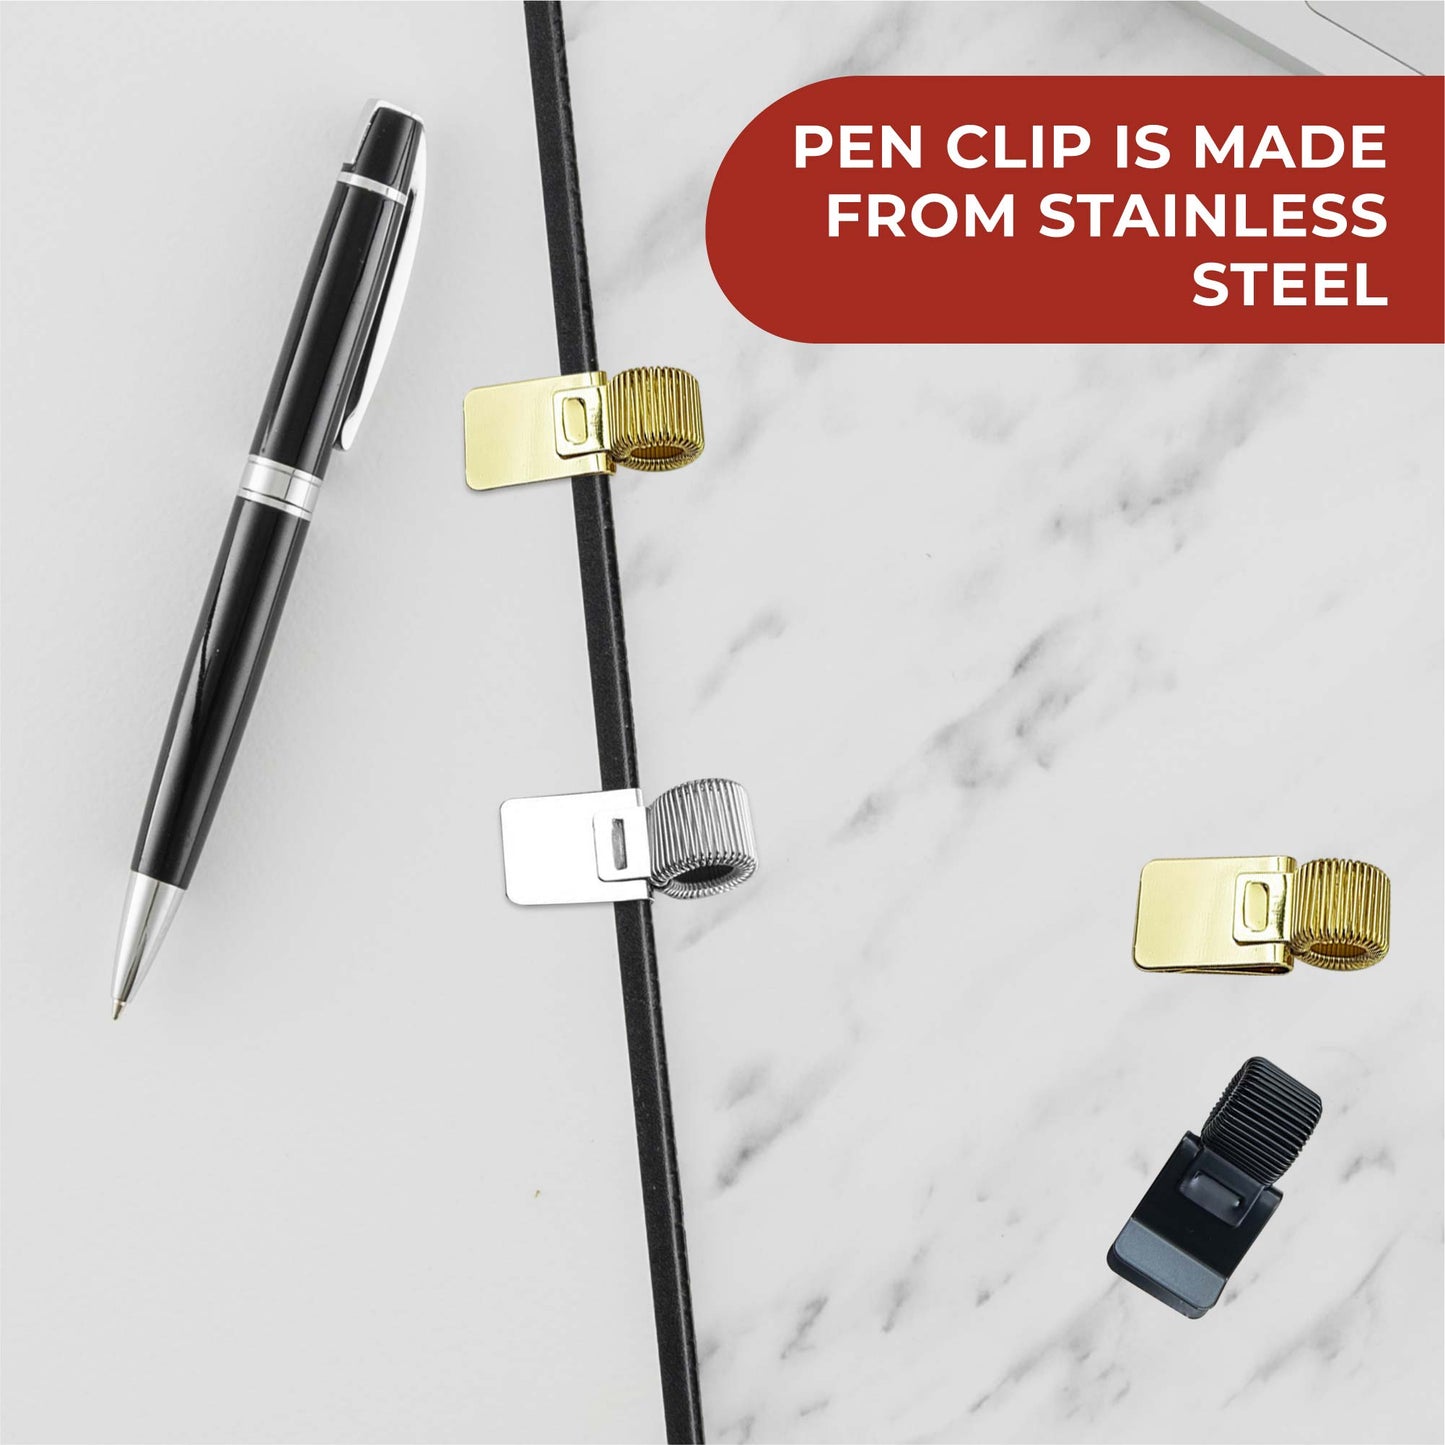 Pack of 100 Metal Pen Holder Clips for Notebook and Clipboard